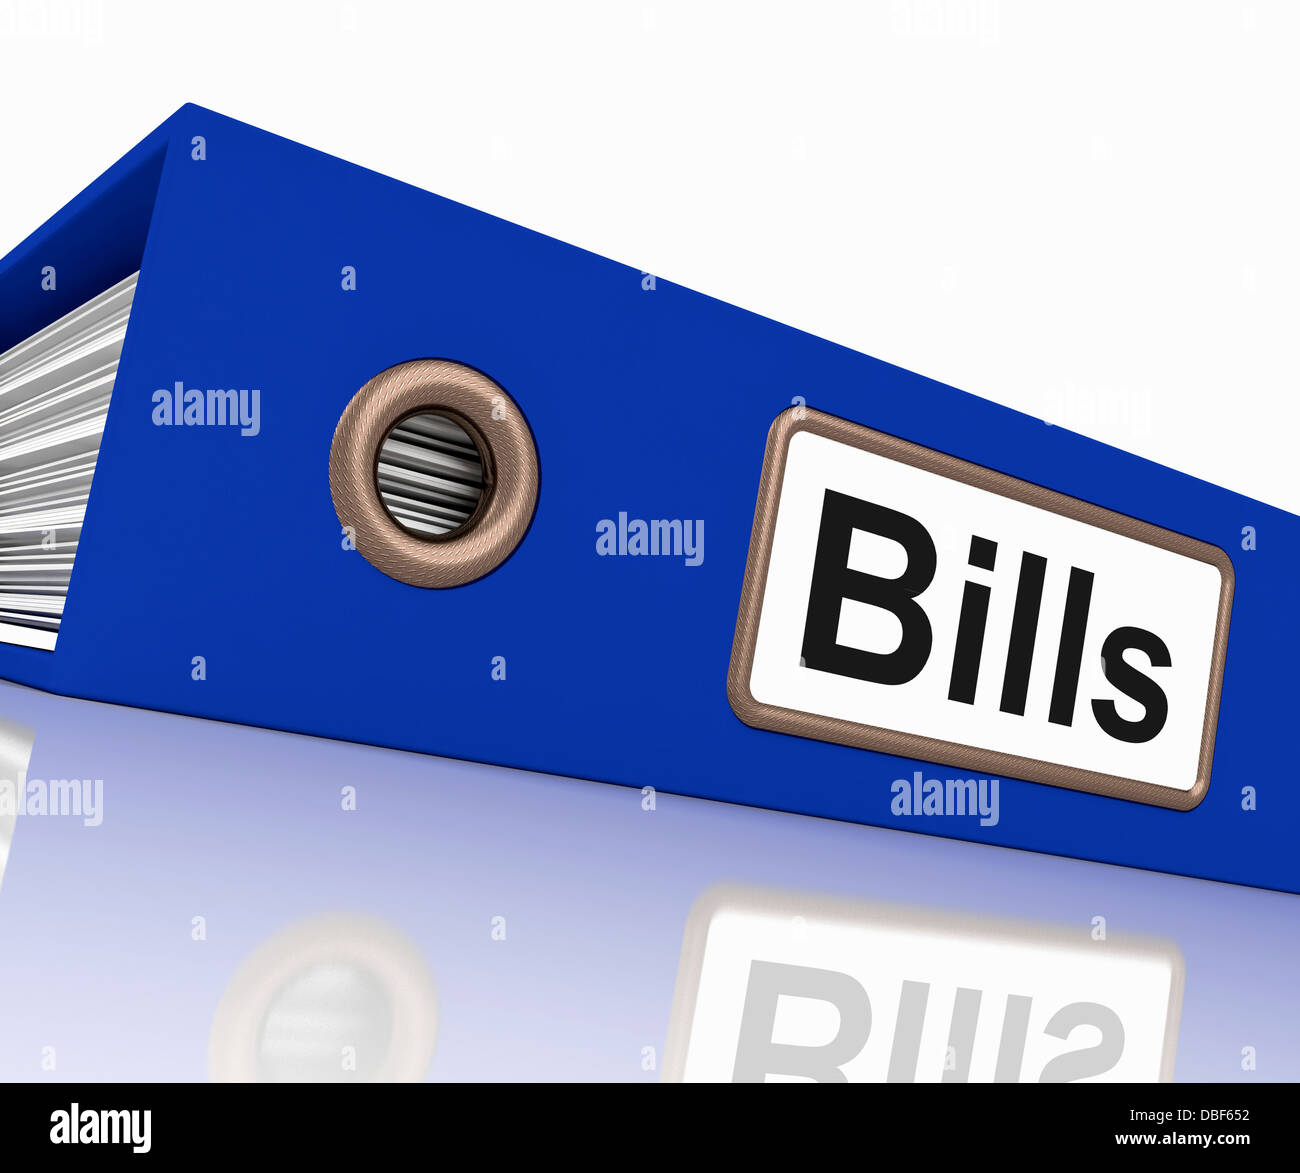 Bills File Shows Accounting And Payments Due Stock Photo